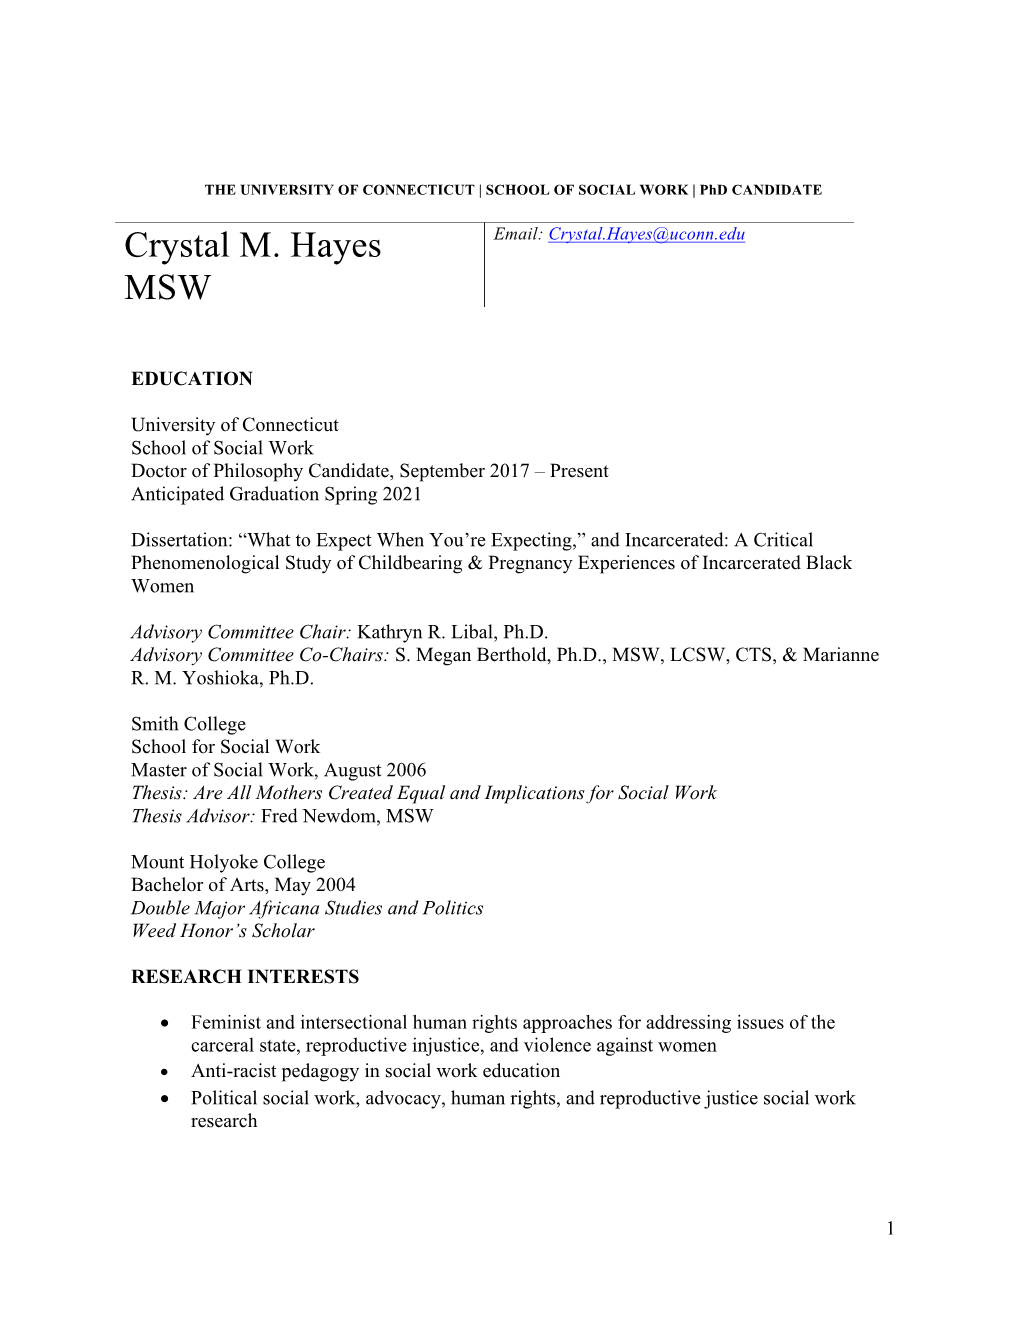 Crystal M. Hayes MSW